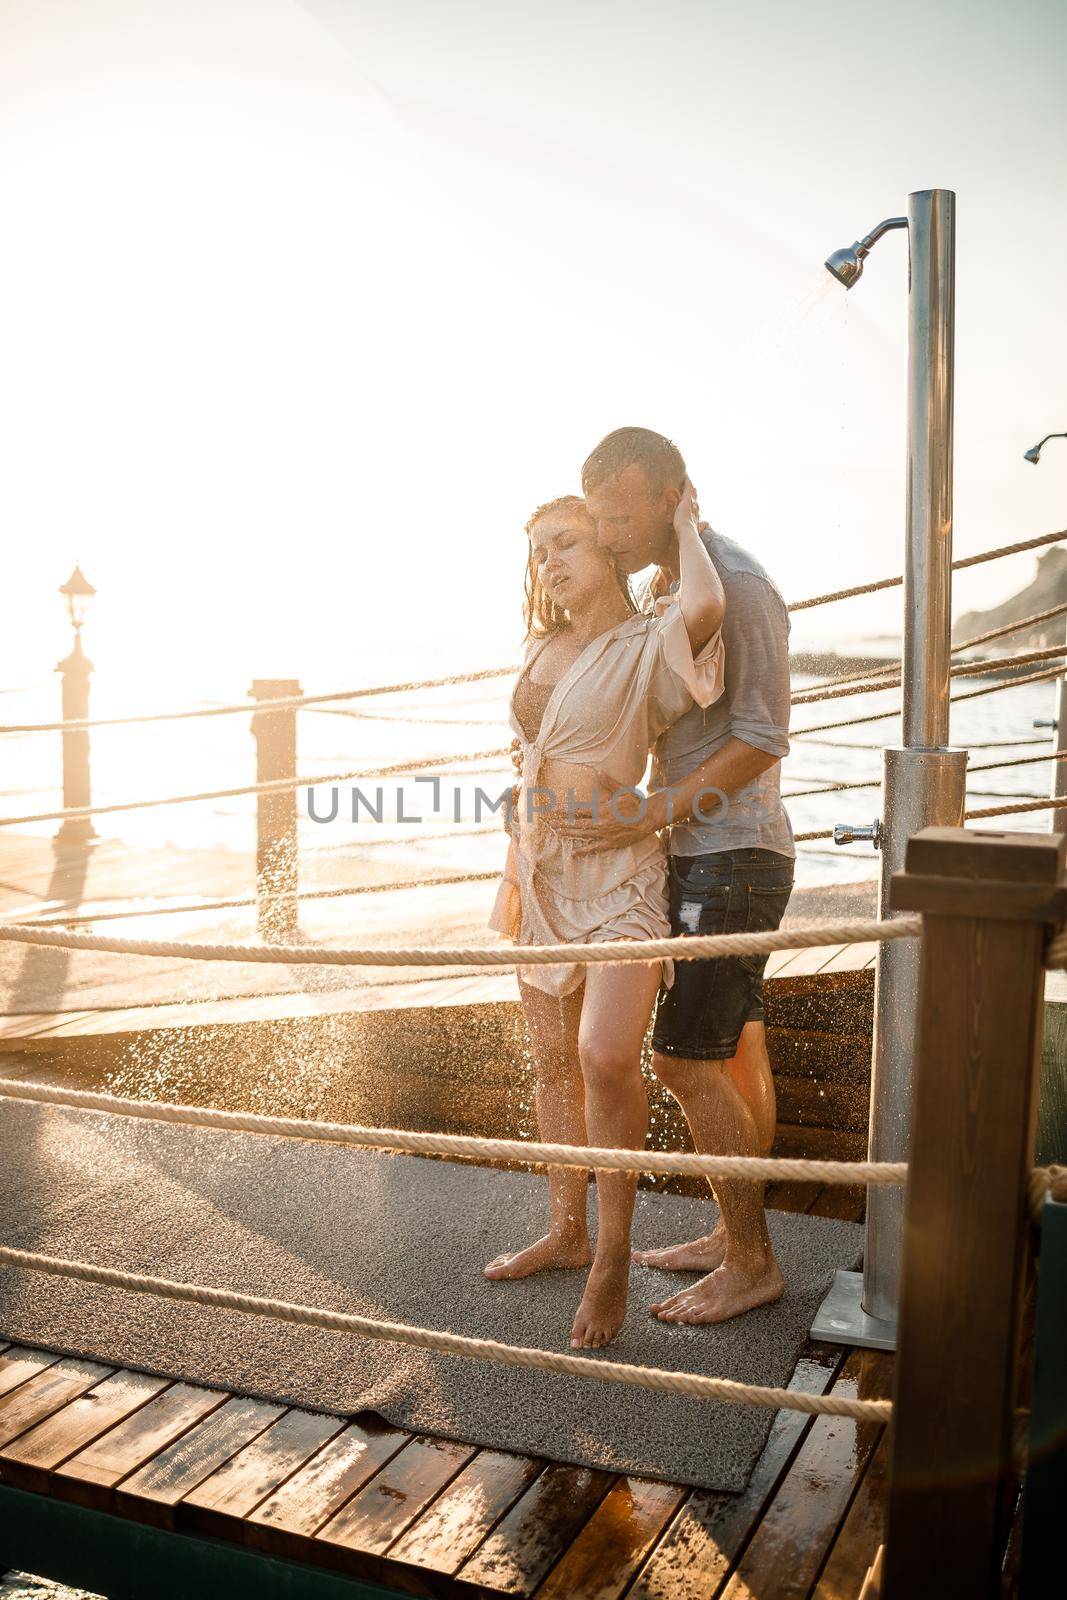 Happy couple by the sea. A guy and a girl are under the shower on an open-air pier. Happy couple on vacation. Man and woman by the sea.